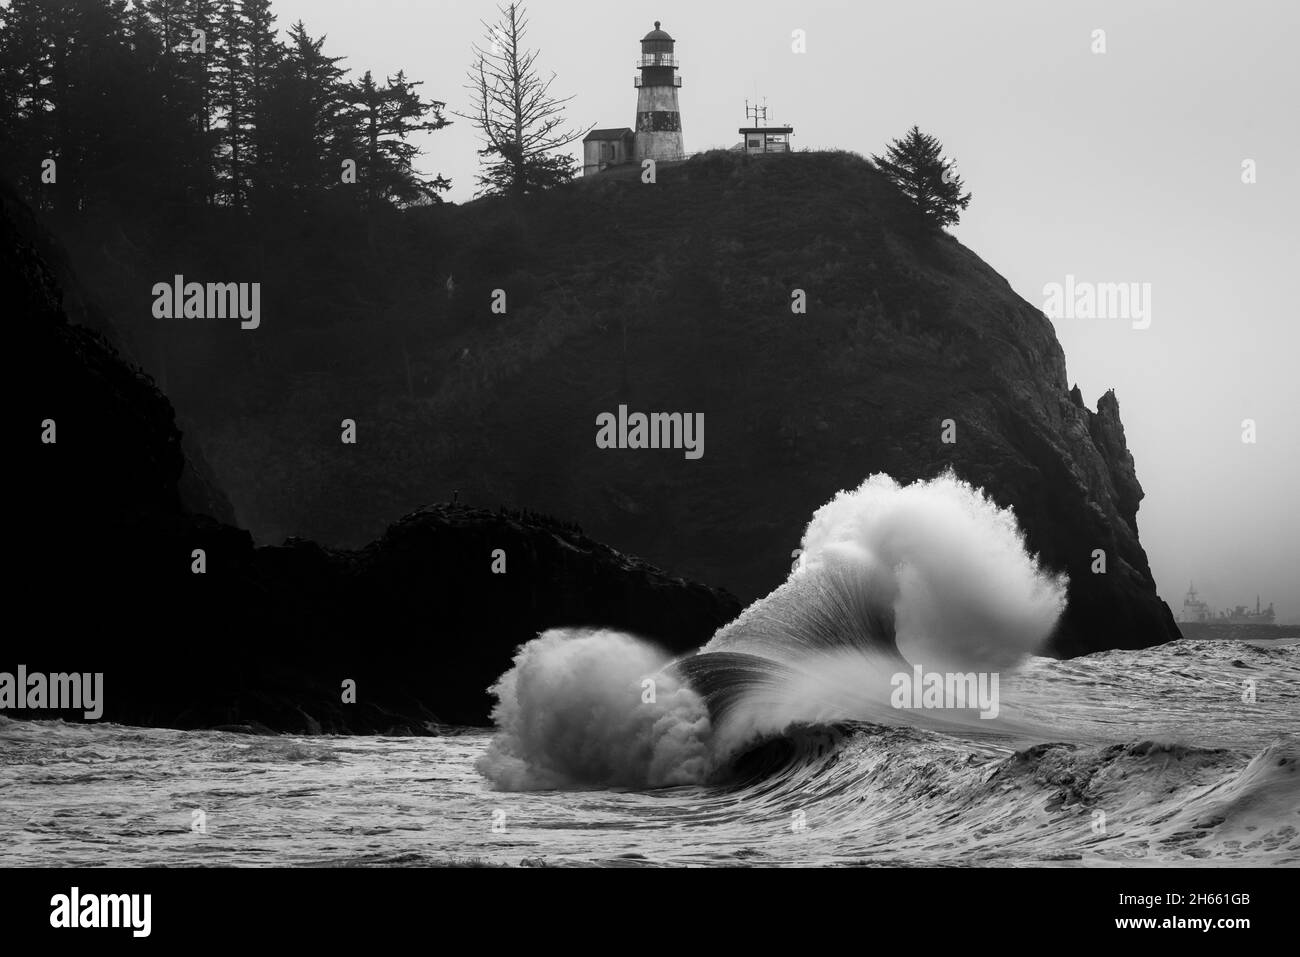 Cape disappointment lighthouse and waves in black and white Stock Photo